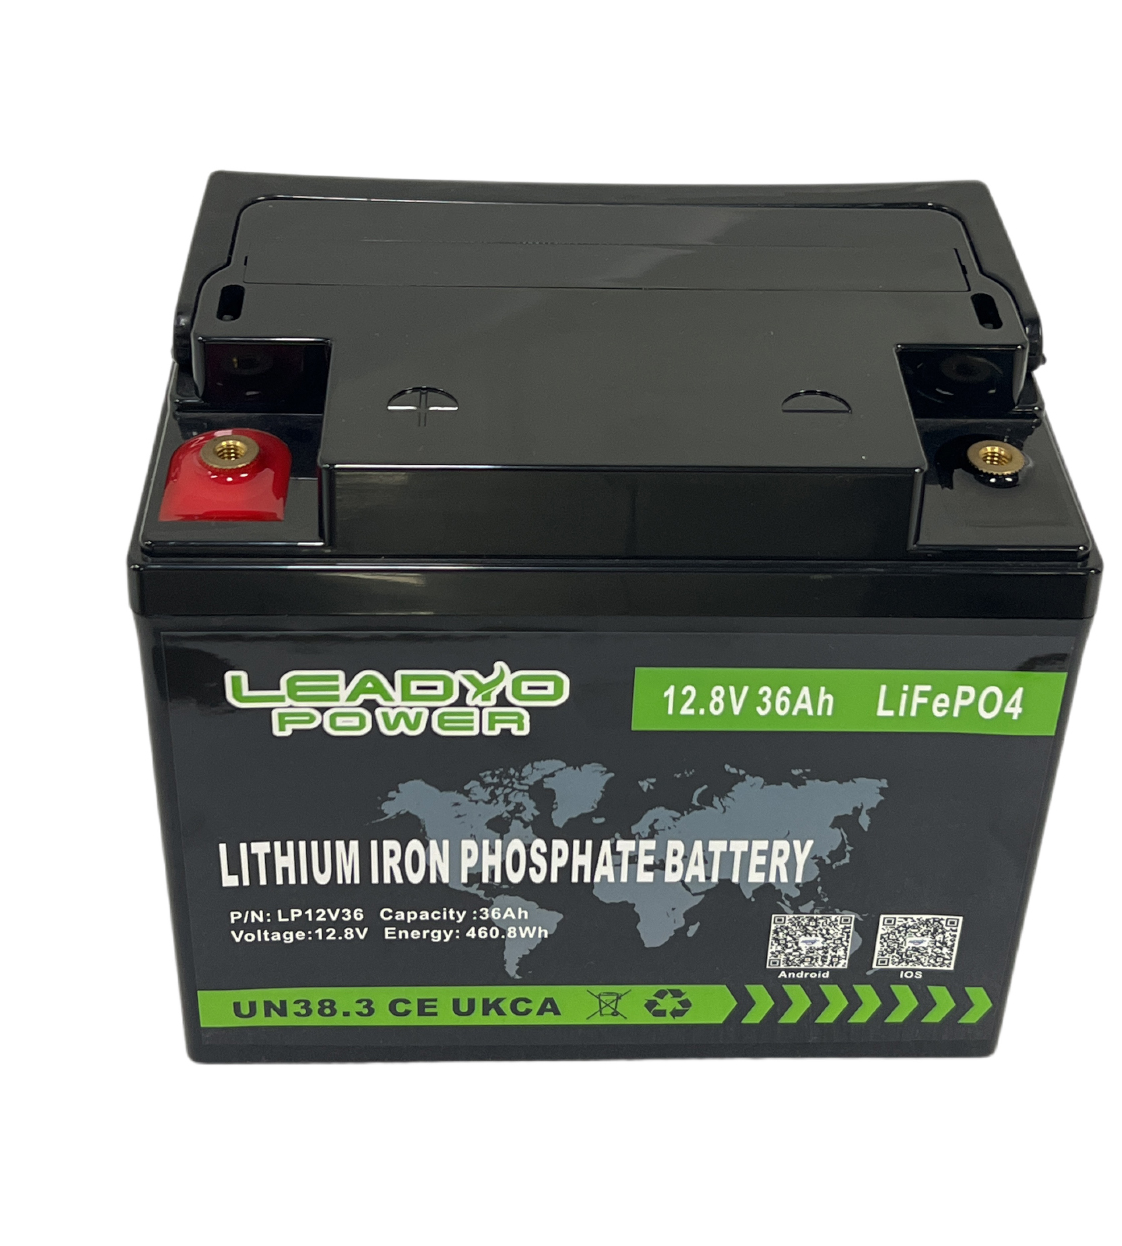 Leadyo Power's High-Performance LiFePO4 Battery Solutions for Diverse Industries